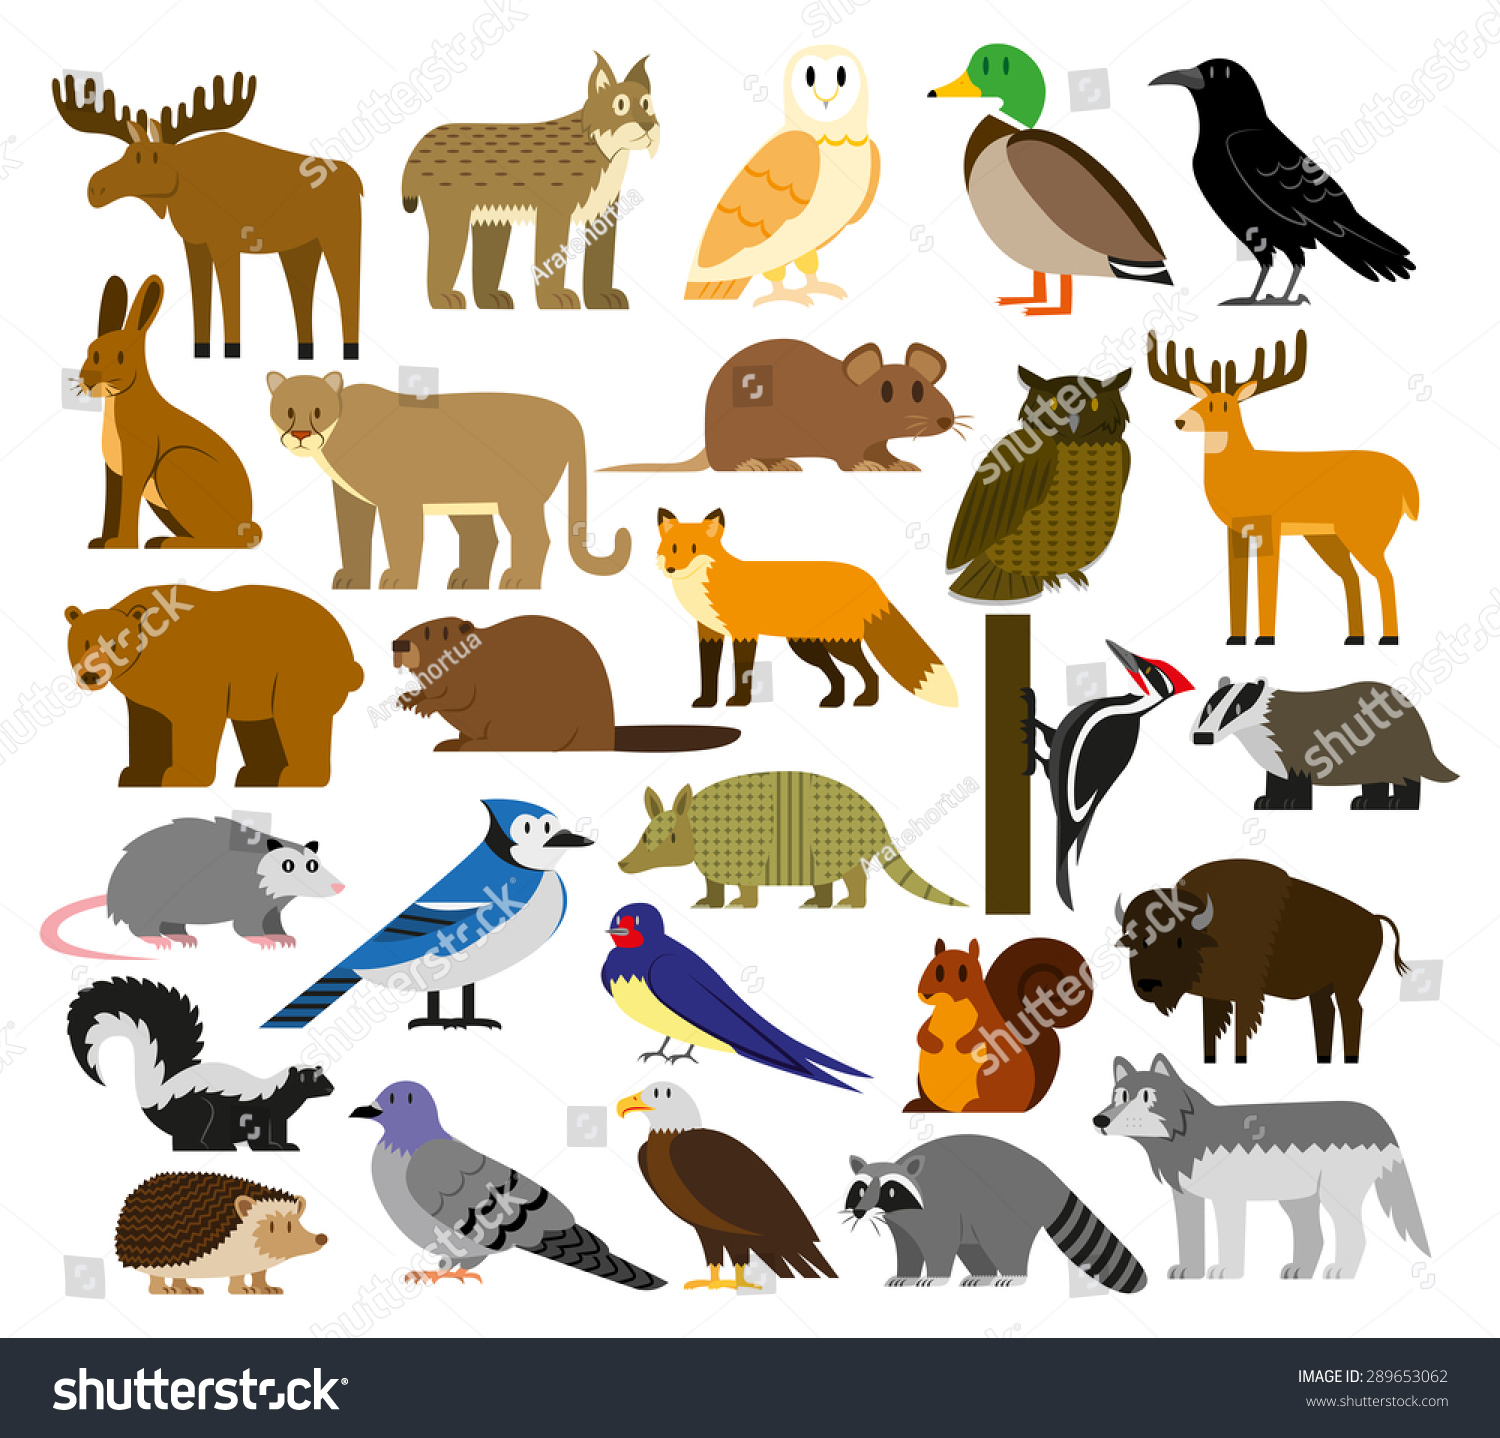 Vector Set Of Cartoon Forest Animals Isolated - 289653062 : Shutterstock